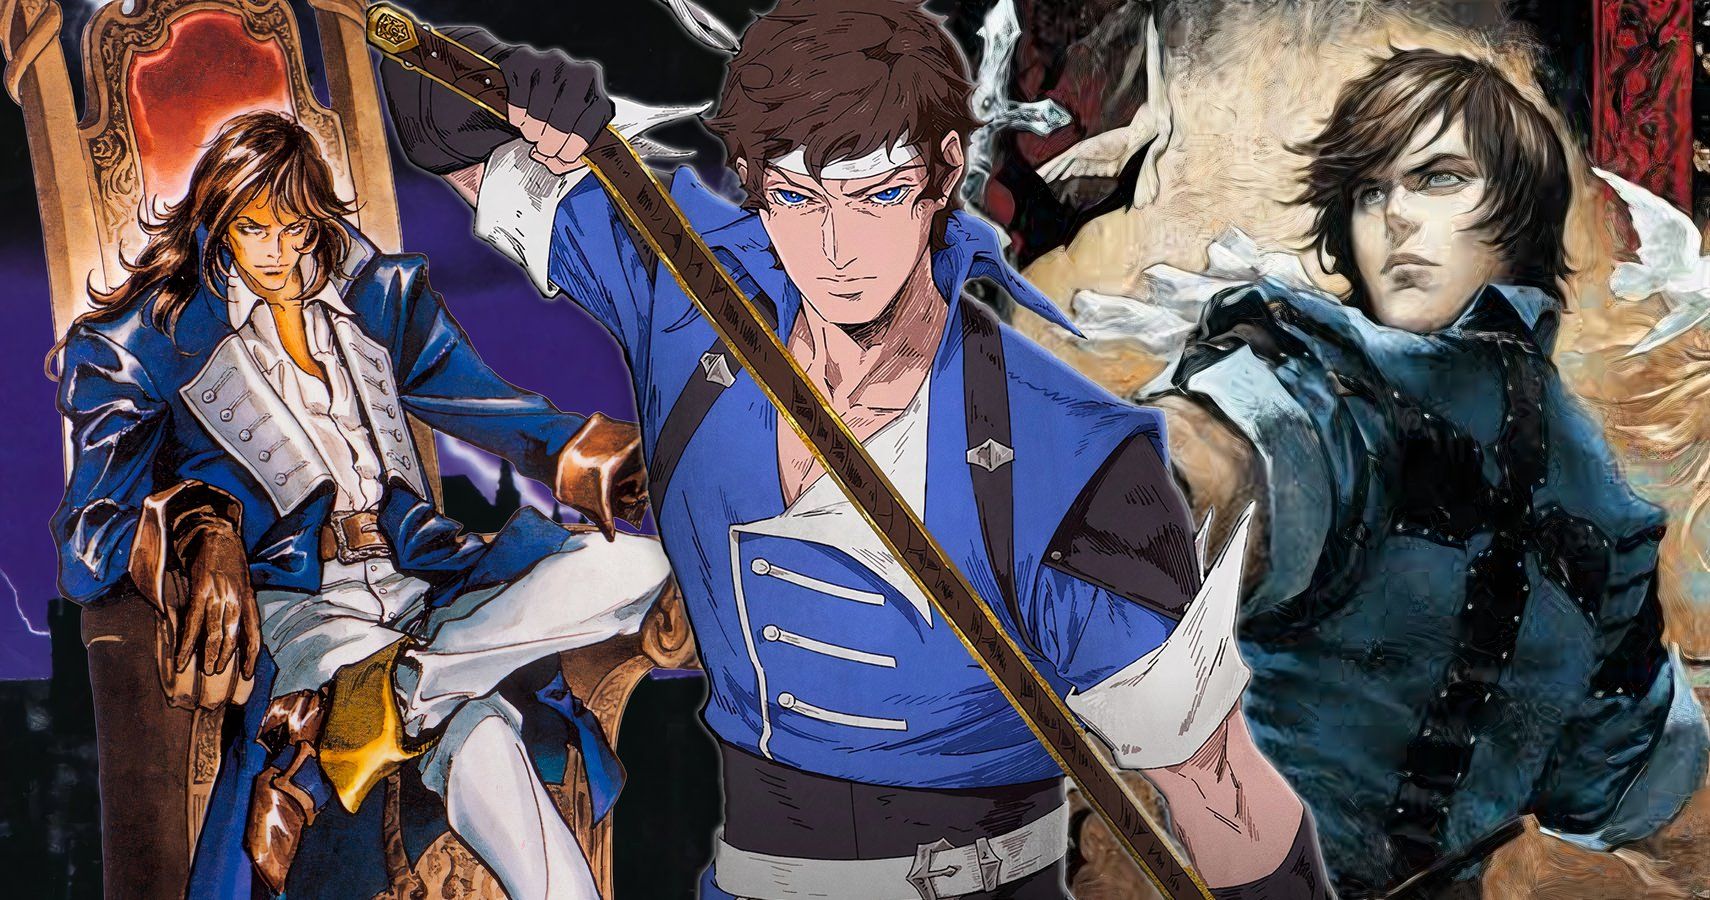 Richter Belmont in Symphony of the Night, Nocturne, and Dracula X Chronicles